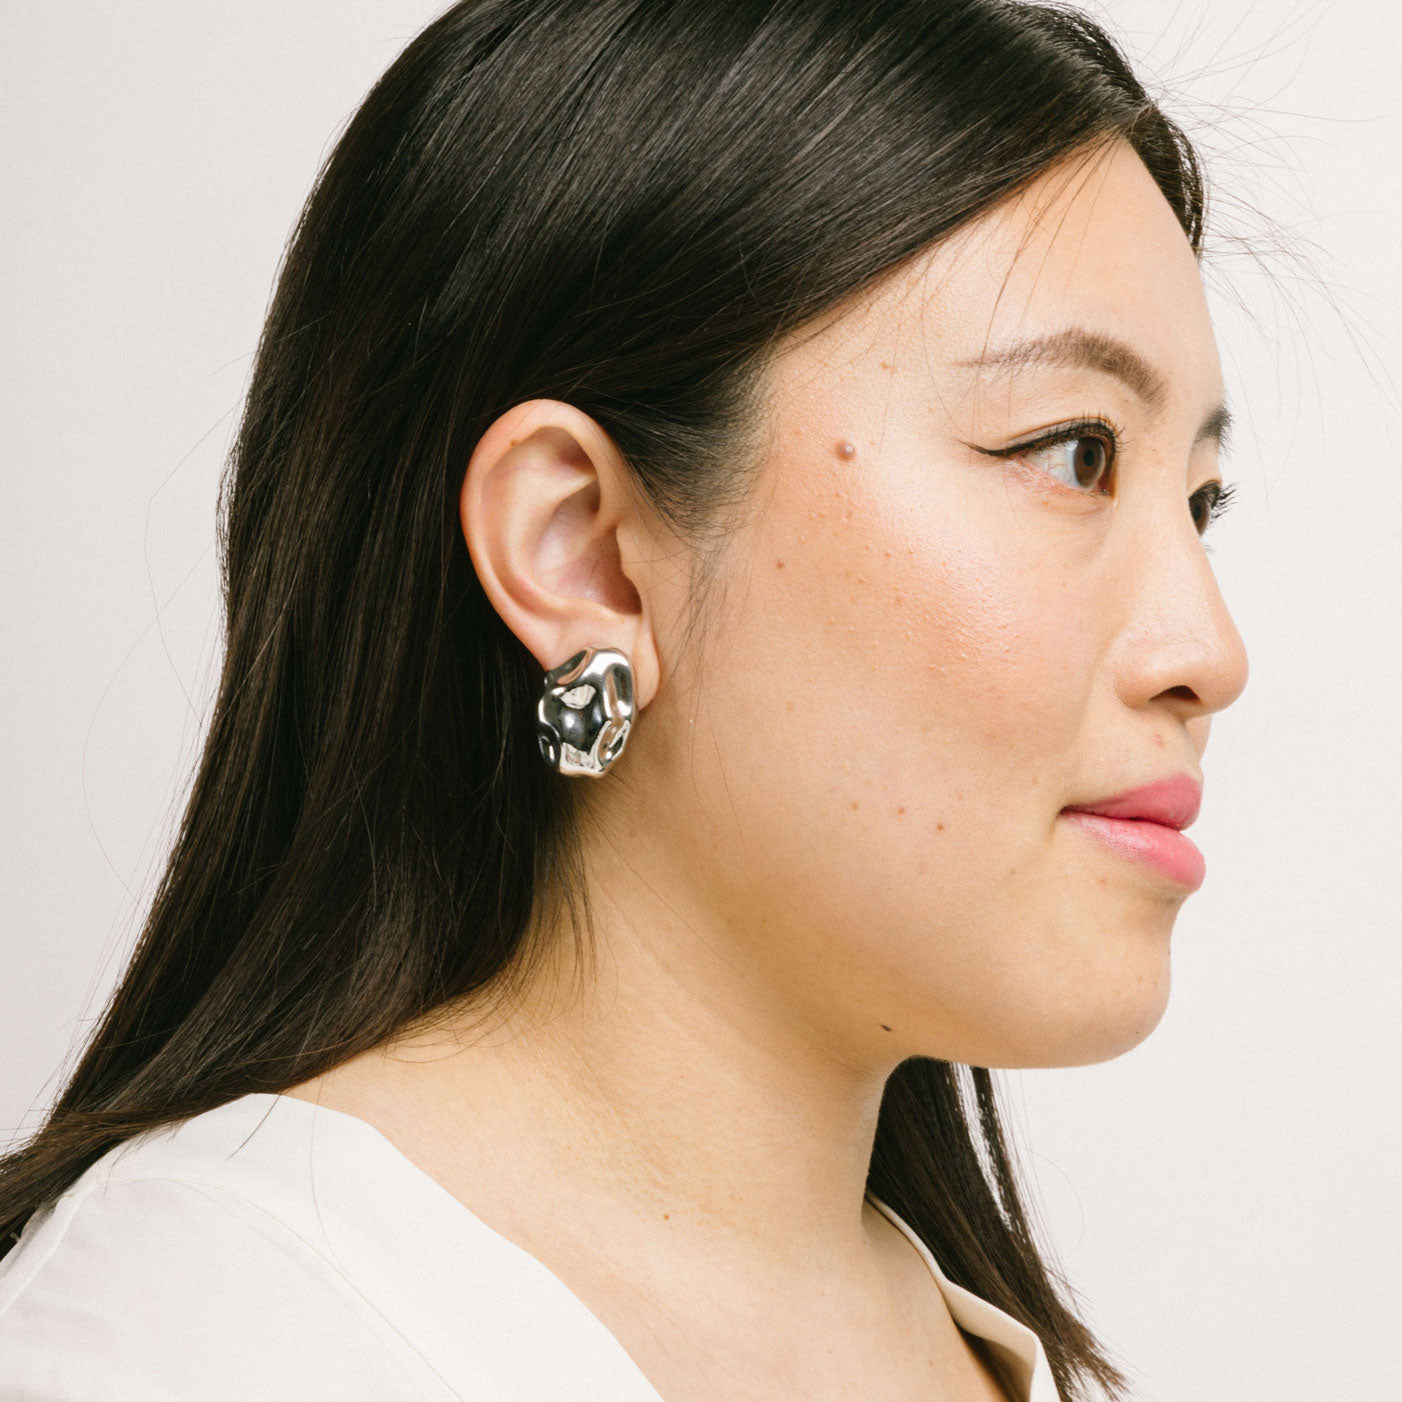 A model wearing the Amaya Clip On Earrings in Silver feature a secure padded clip-on closure type, making them suitable for all ear types.The average comfortable wear duration is 8-12 hours, and the Copper Alloy construction ensures a reliable and secure hold. The item is sold as one pair; adjustable rubber padding is included.